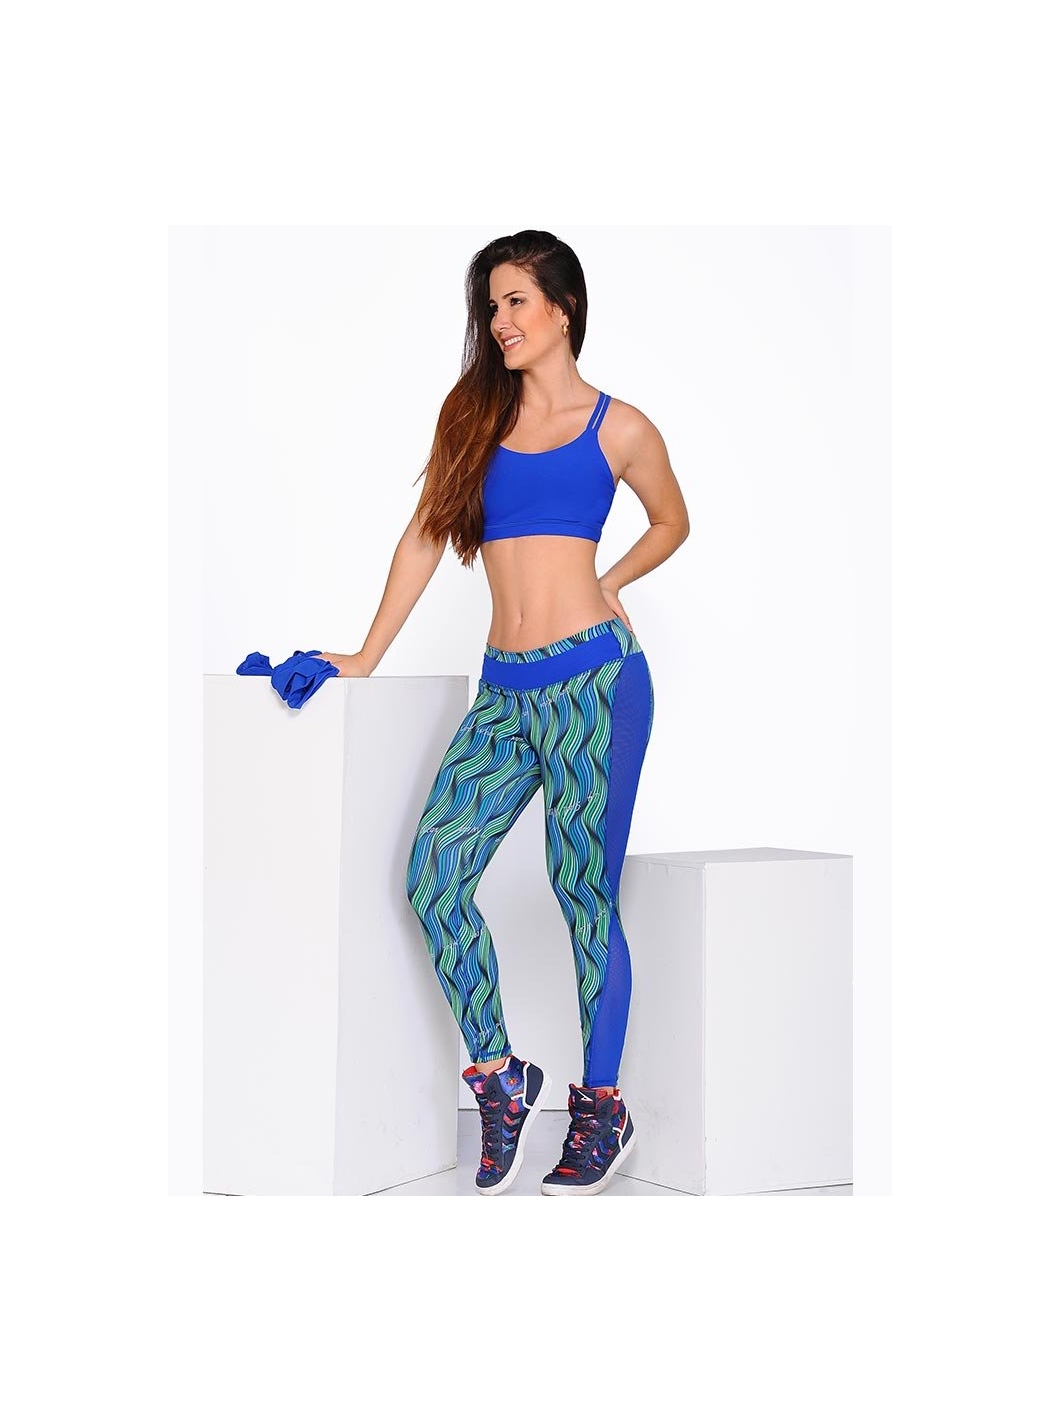 Women's Gym Wear Sets, Great Variety So You Can Choose Your best Style